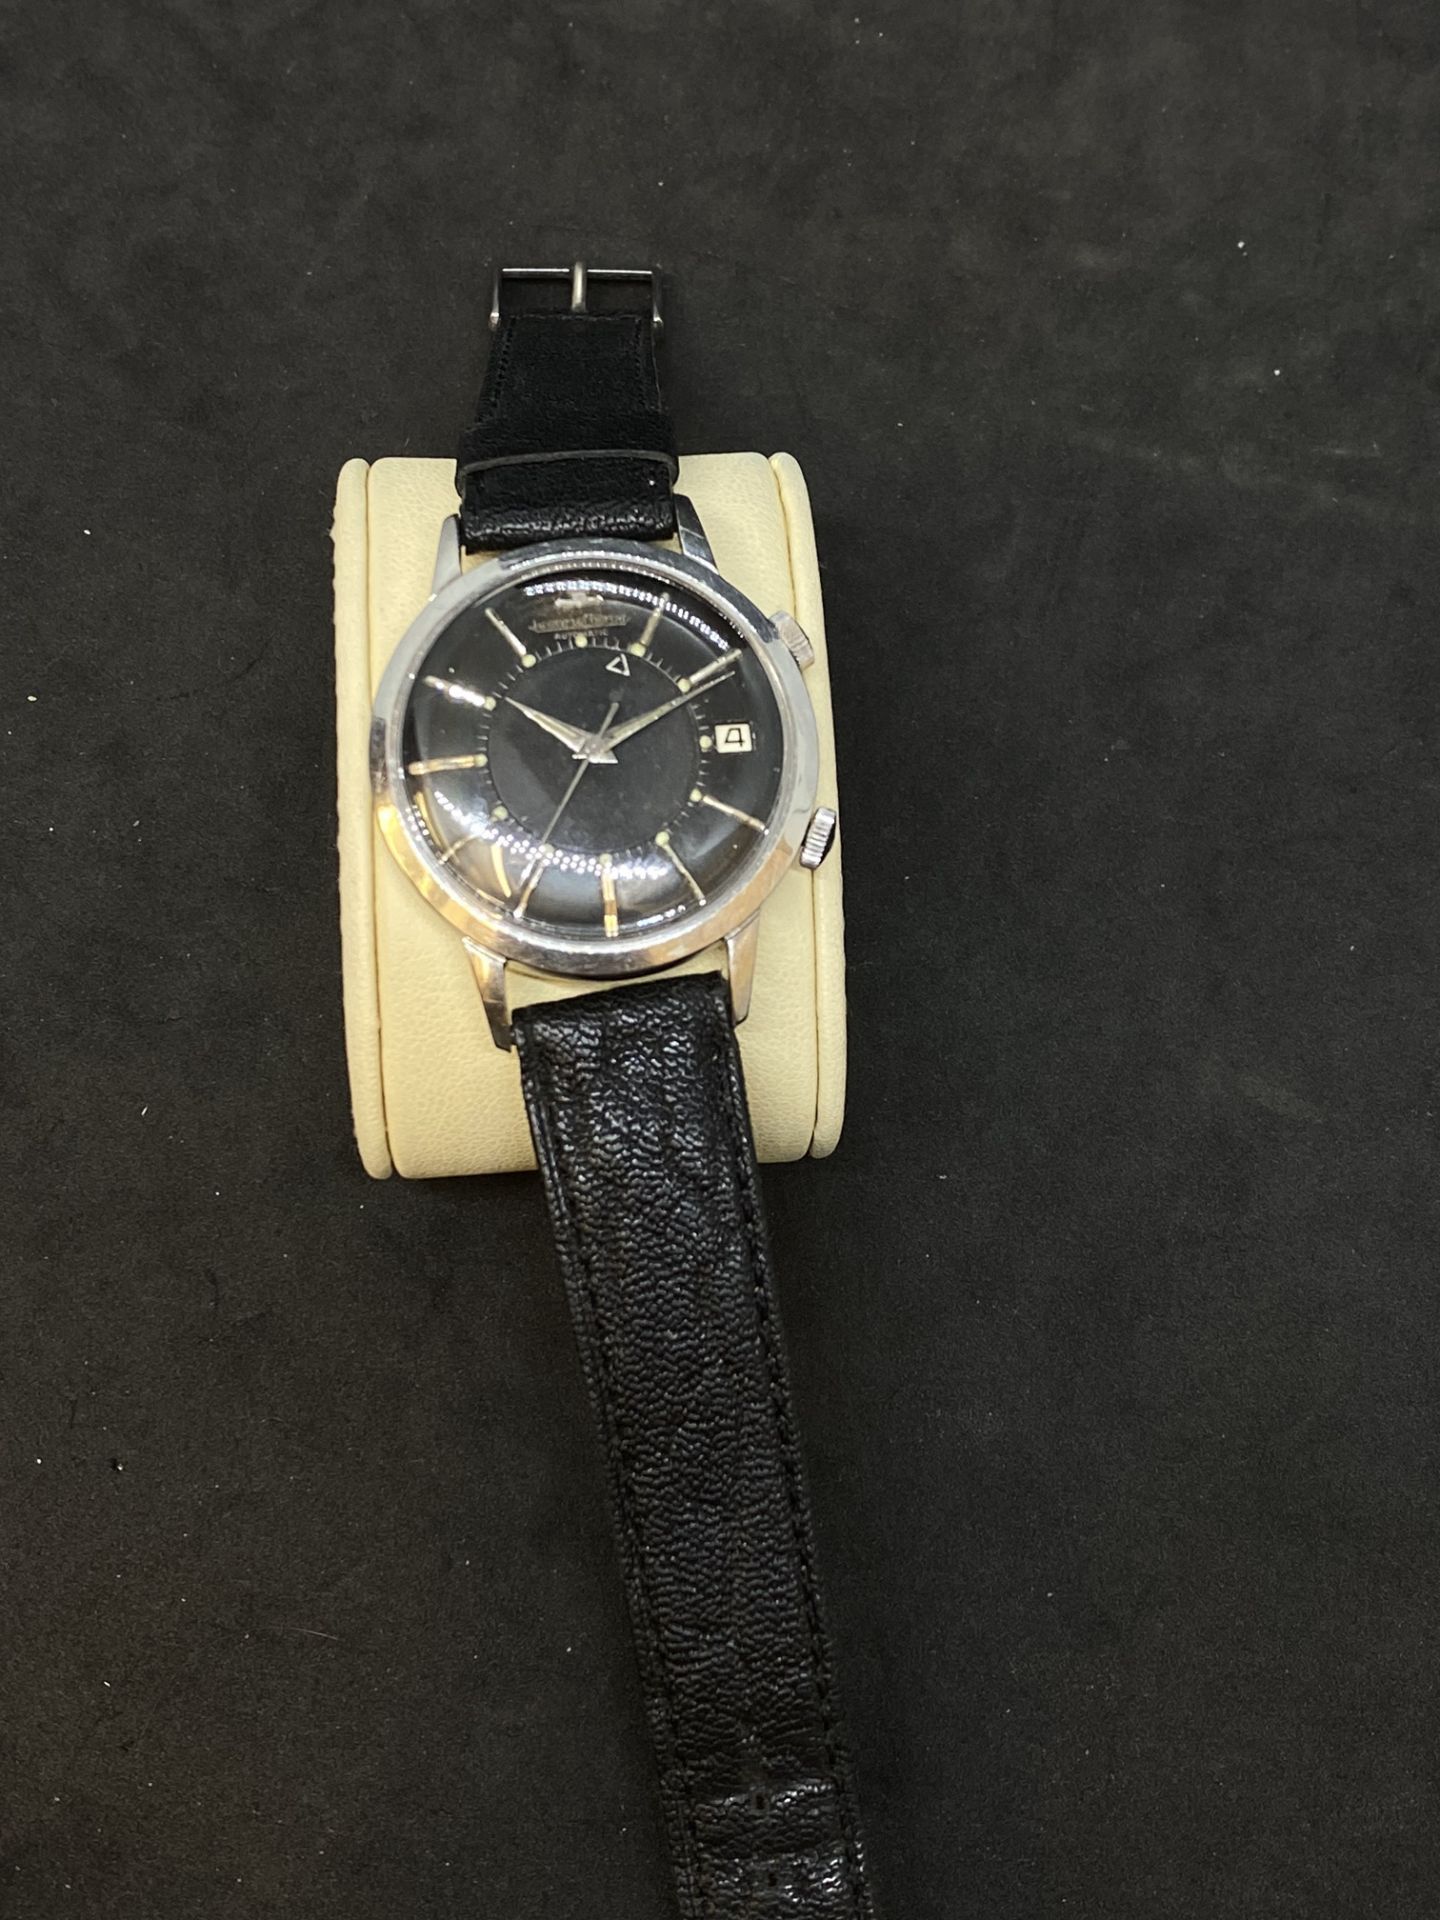 JAEGER LECOULTRE VINTAGE WATCH - Image 3 of 9